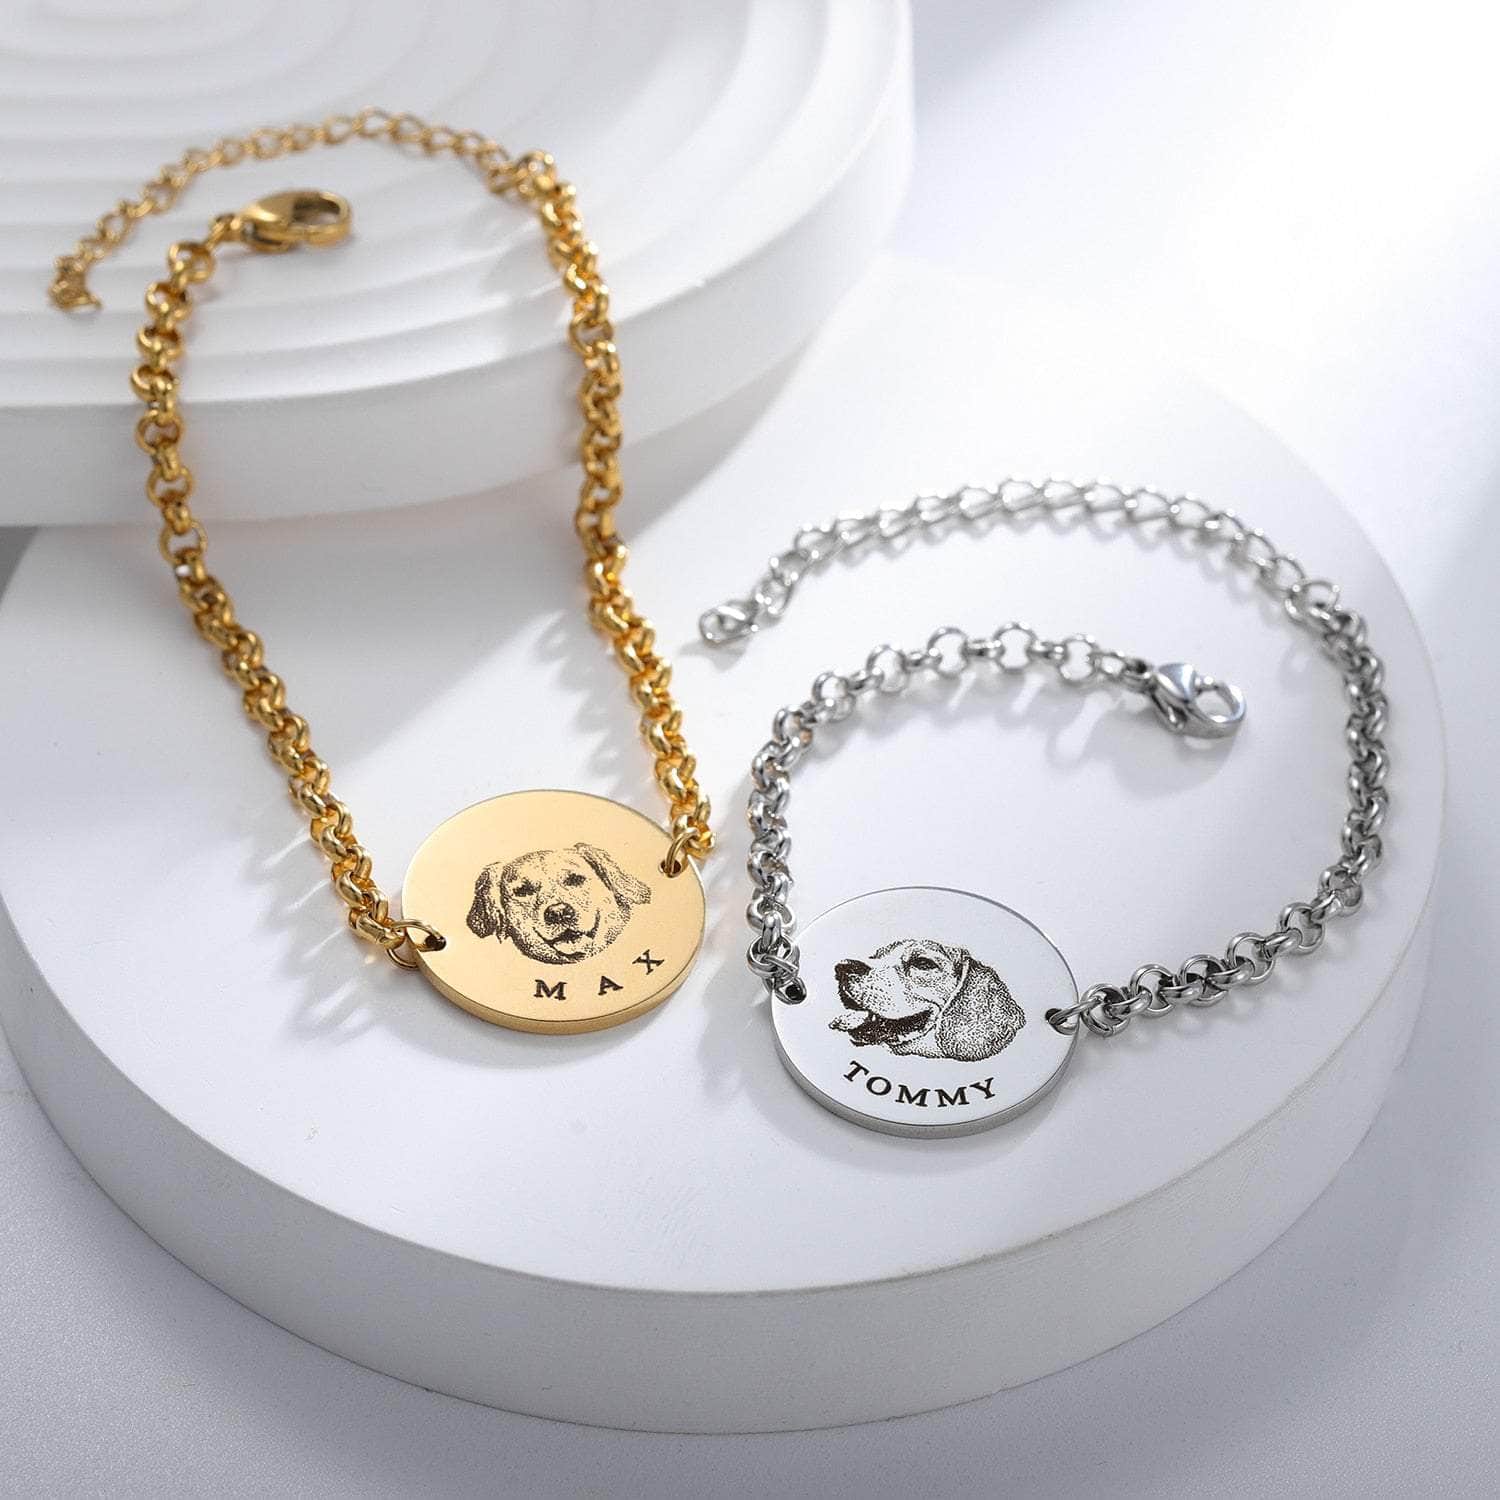 La Michy Tienda Custom Pet Portrait Bracelet Personalized Dog Memorial Engraved Necklace Stainless Steel Pet Gift for Loving  Memory Jewelry